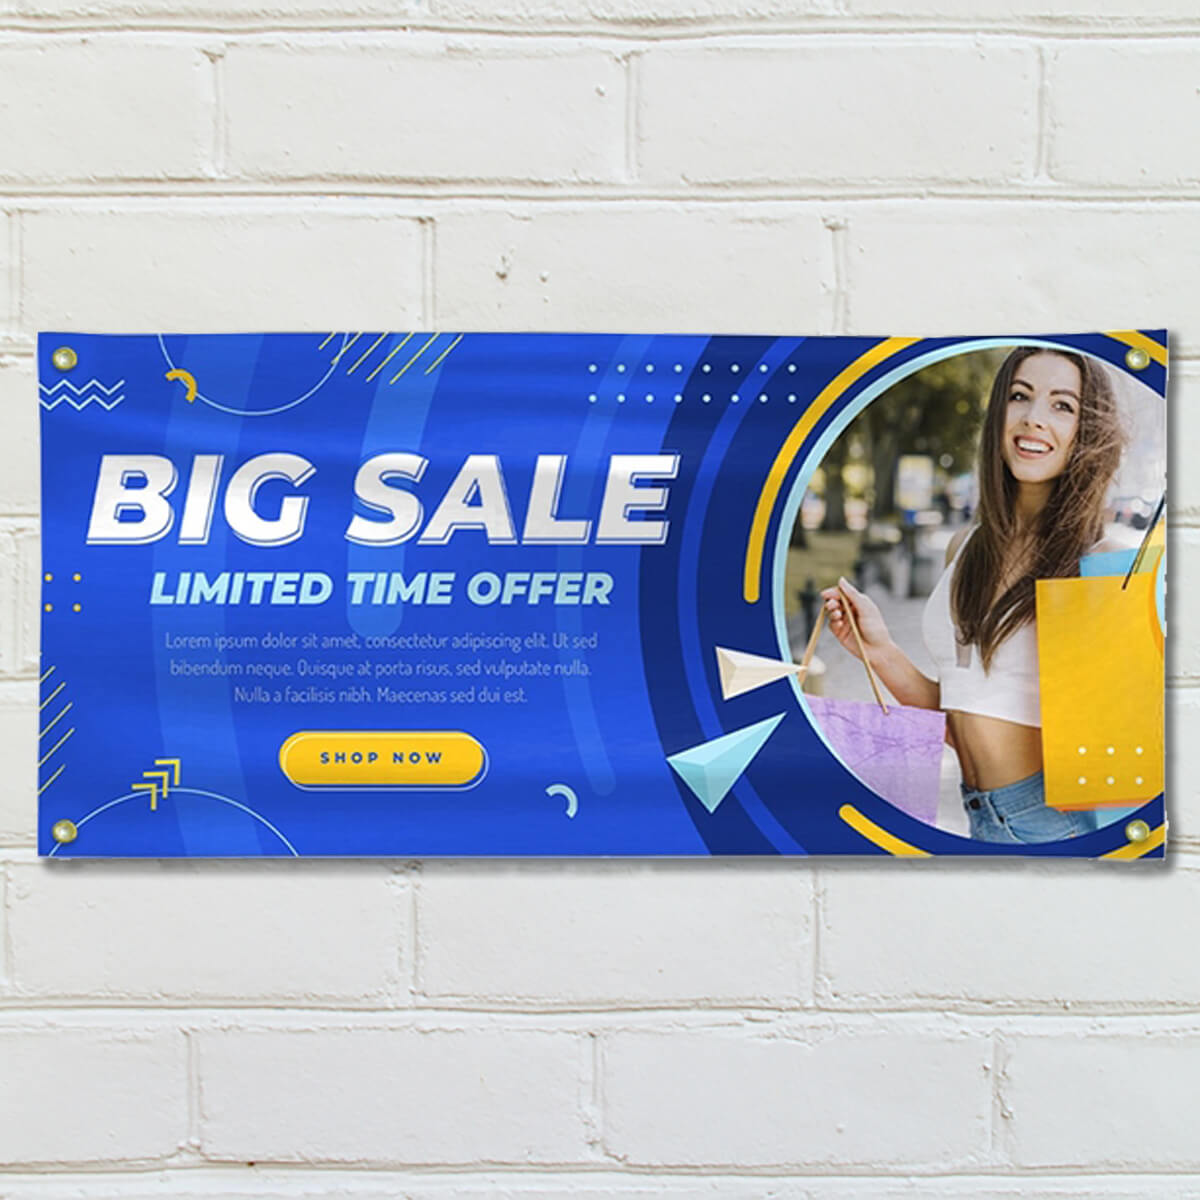 Big sale design vinyl banner and signs print by Curative Printing